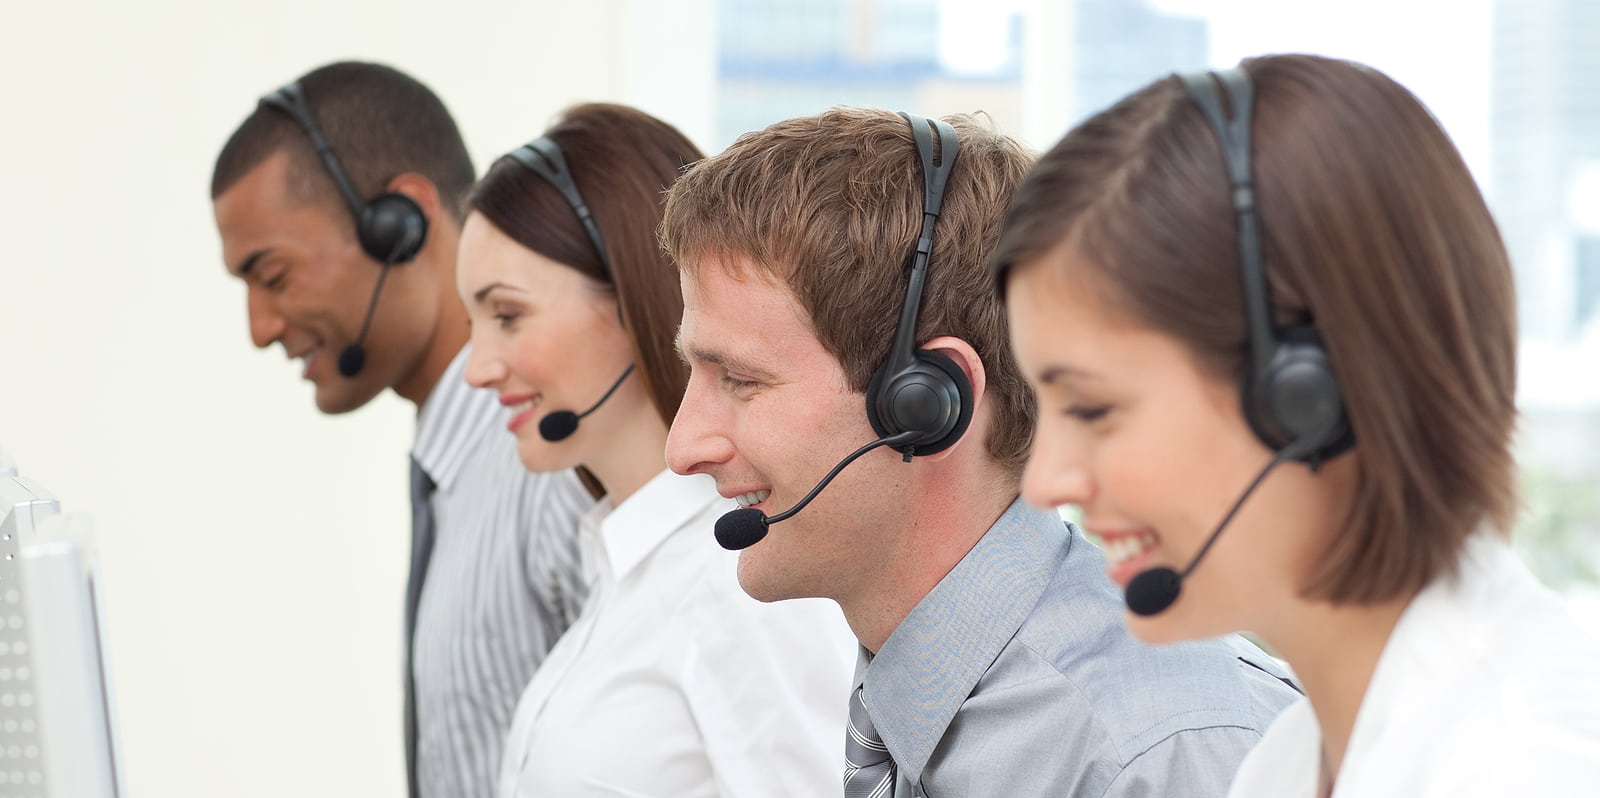 Co-workers with headset on In A Call Center